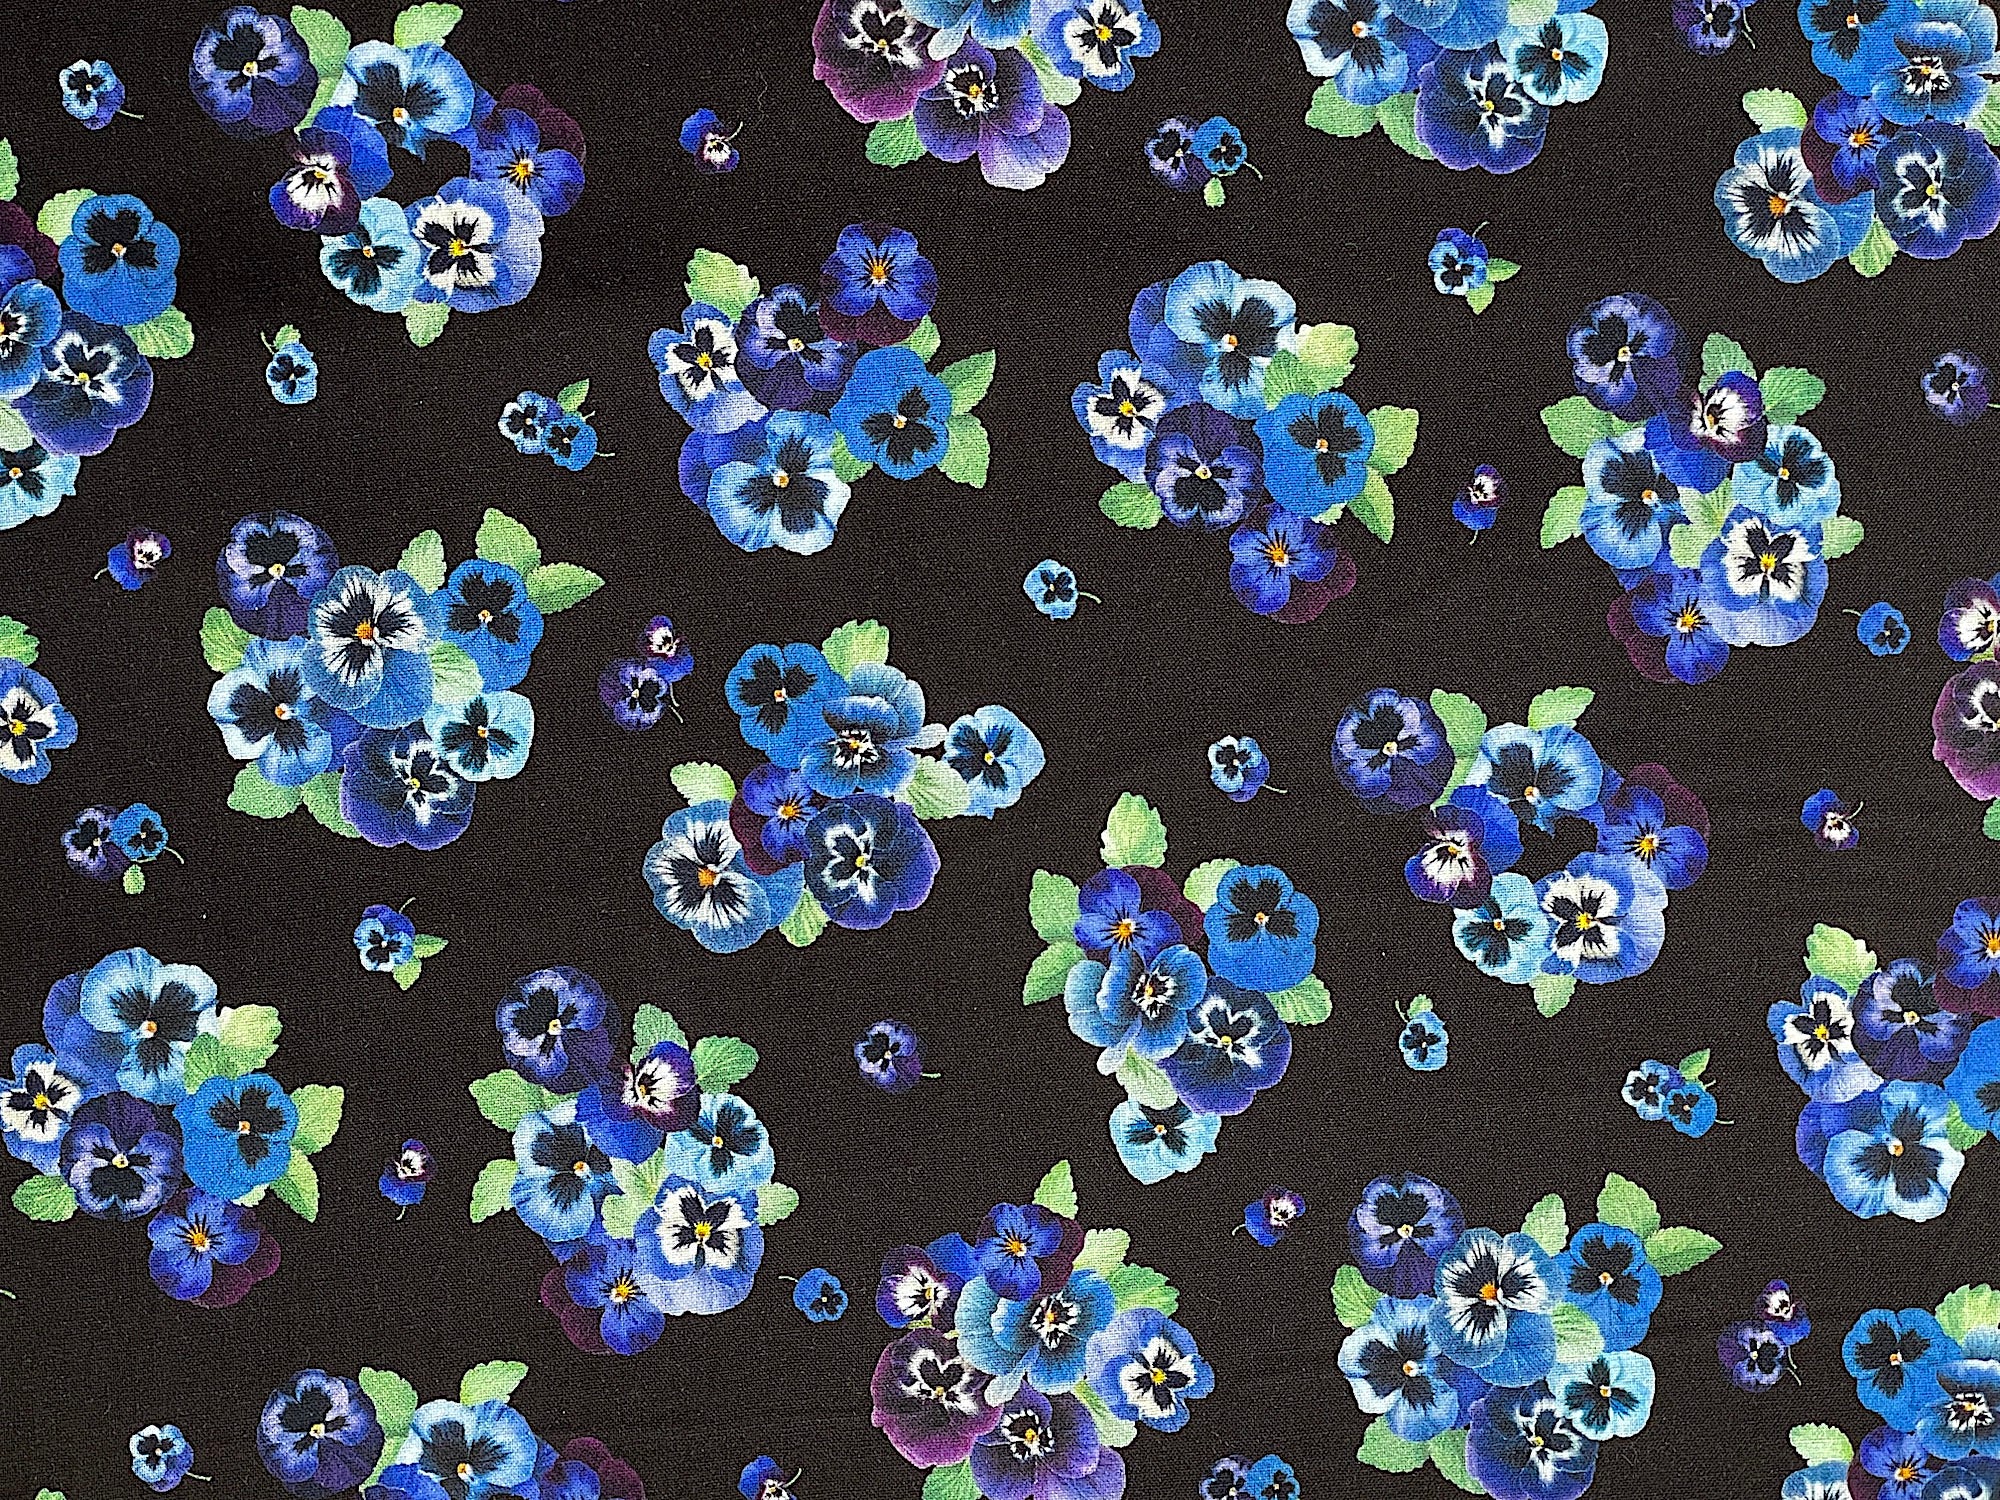 Cotton fabric covered with pansies.